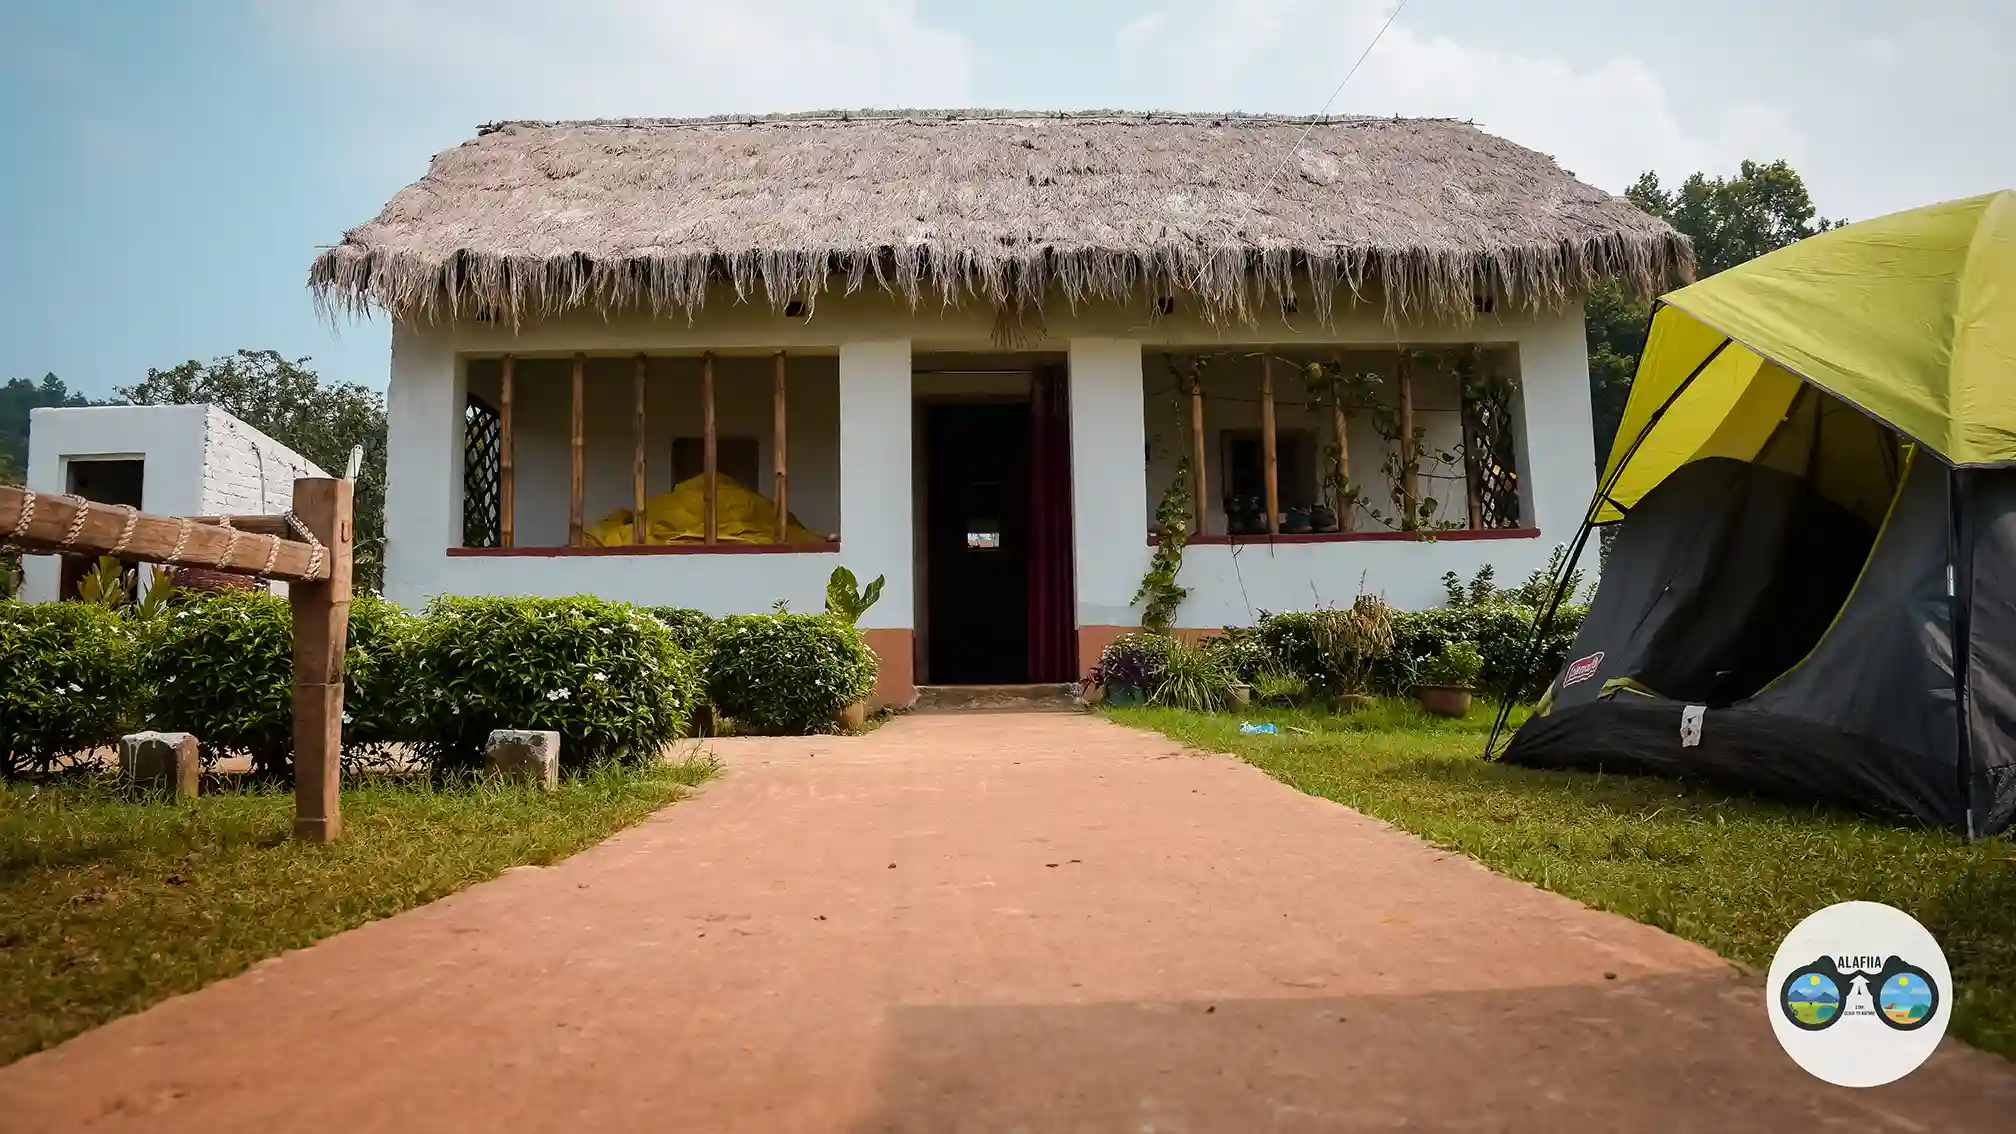 Sustainable Tourism in Dhangikushum Hudhudi: How the Homestay Supports the Local Community